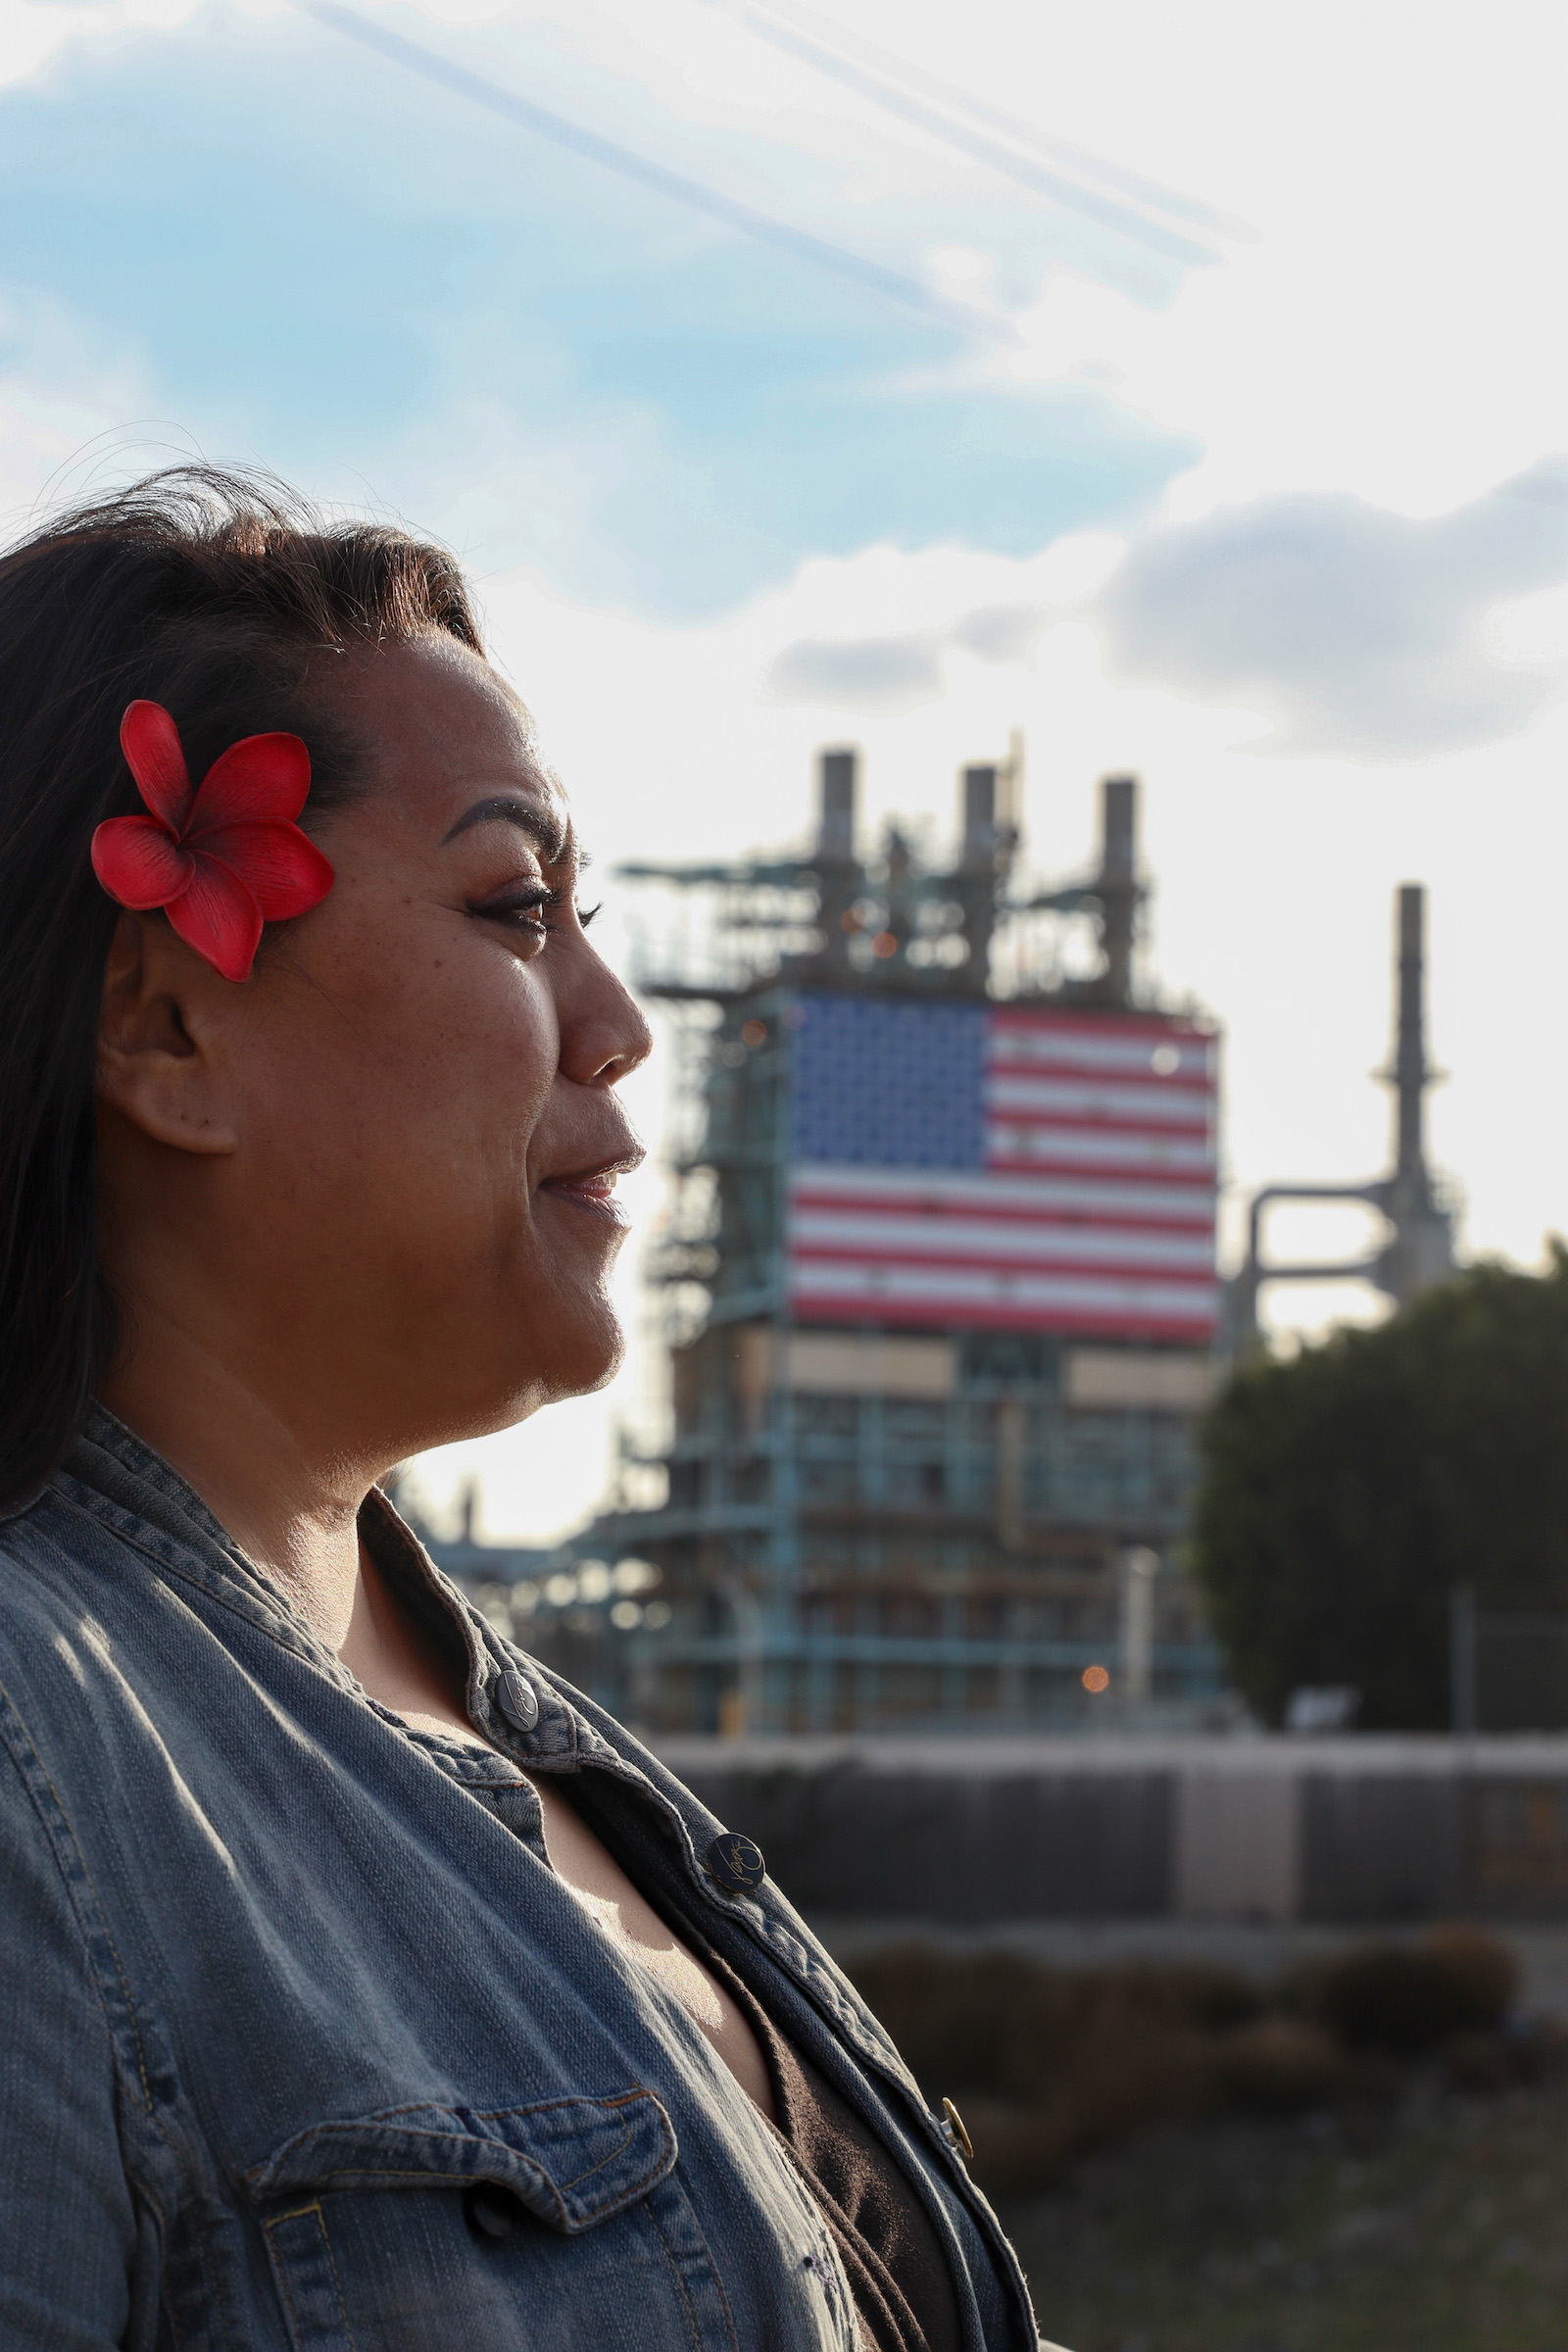 A woman with a flower in her hair looks to the right in profile with a large refinery with an American flag on it is seen in the background